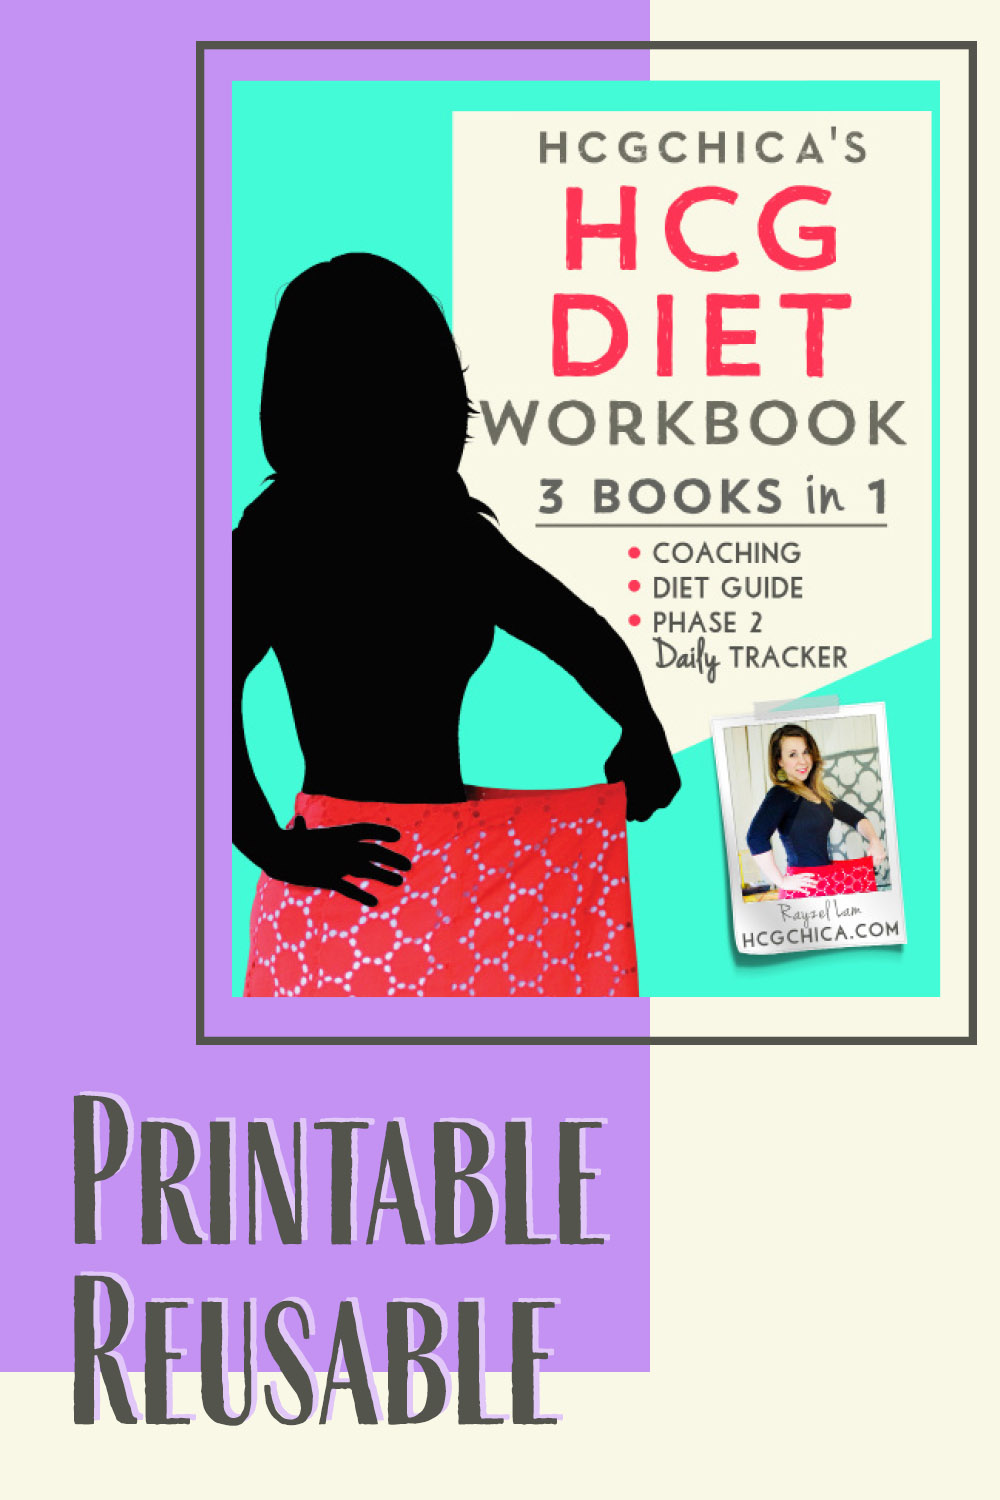 hCG Diet Workbook - Downloadable Reusable Printable Journal - Diet Guide, Coaching, Phase 2 Daily Tracker